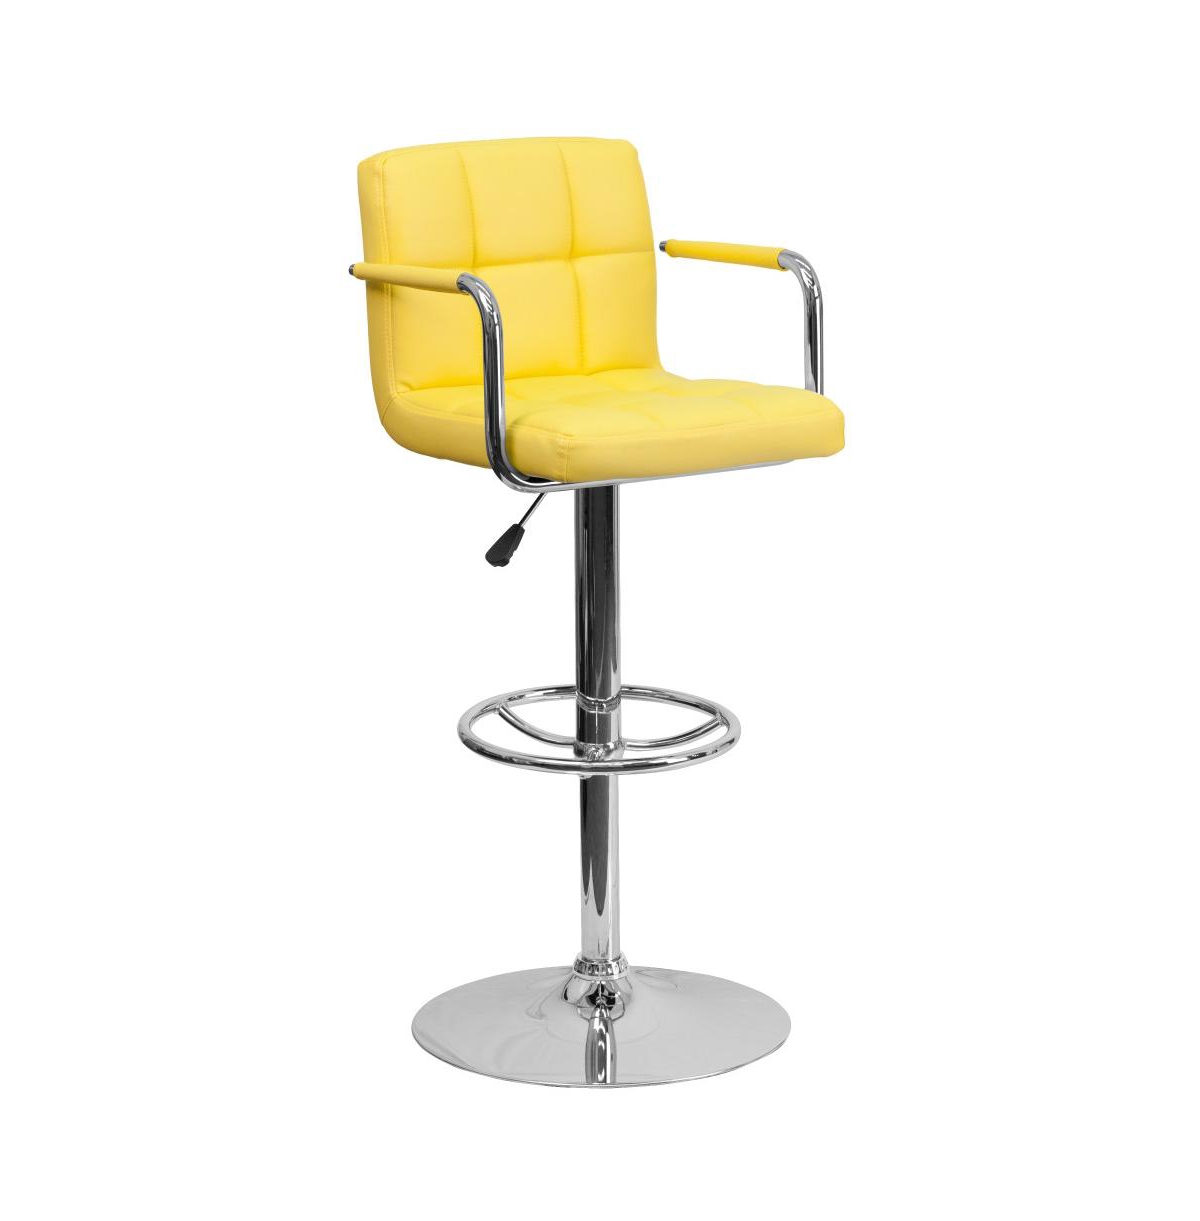 Emma+oliver Contemporary Quilted Vinyl Adjustable Height Barstool With Arms In Yellow